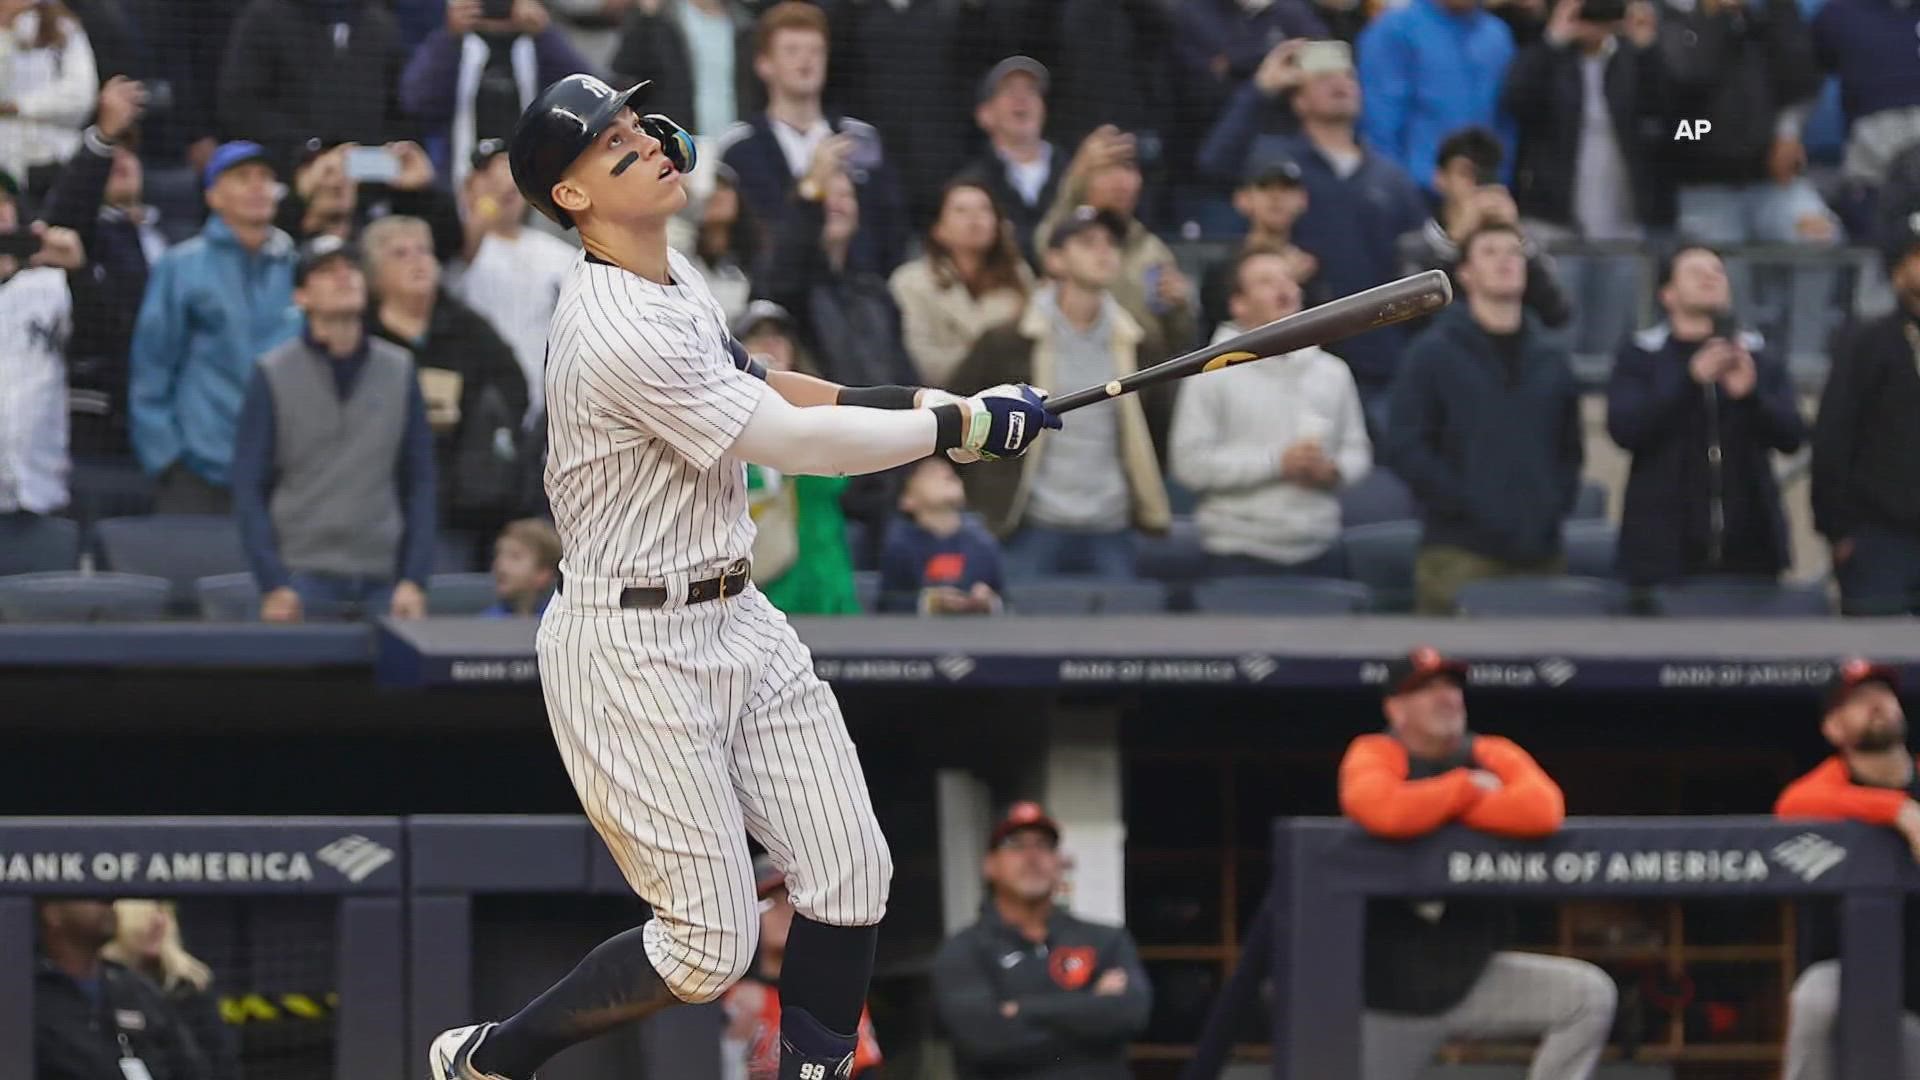 Judge is one home run away from breaking the American League record.